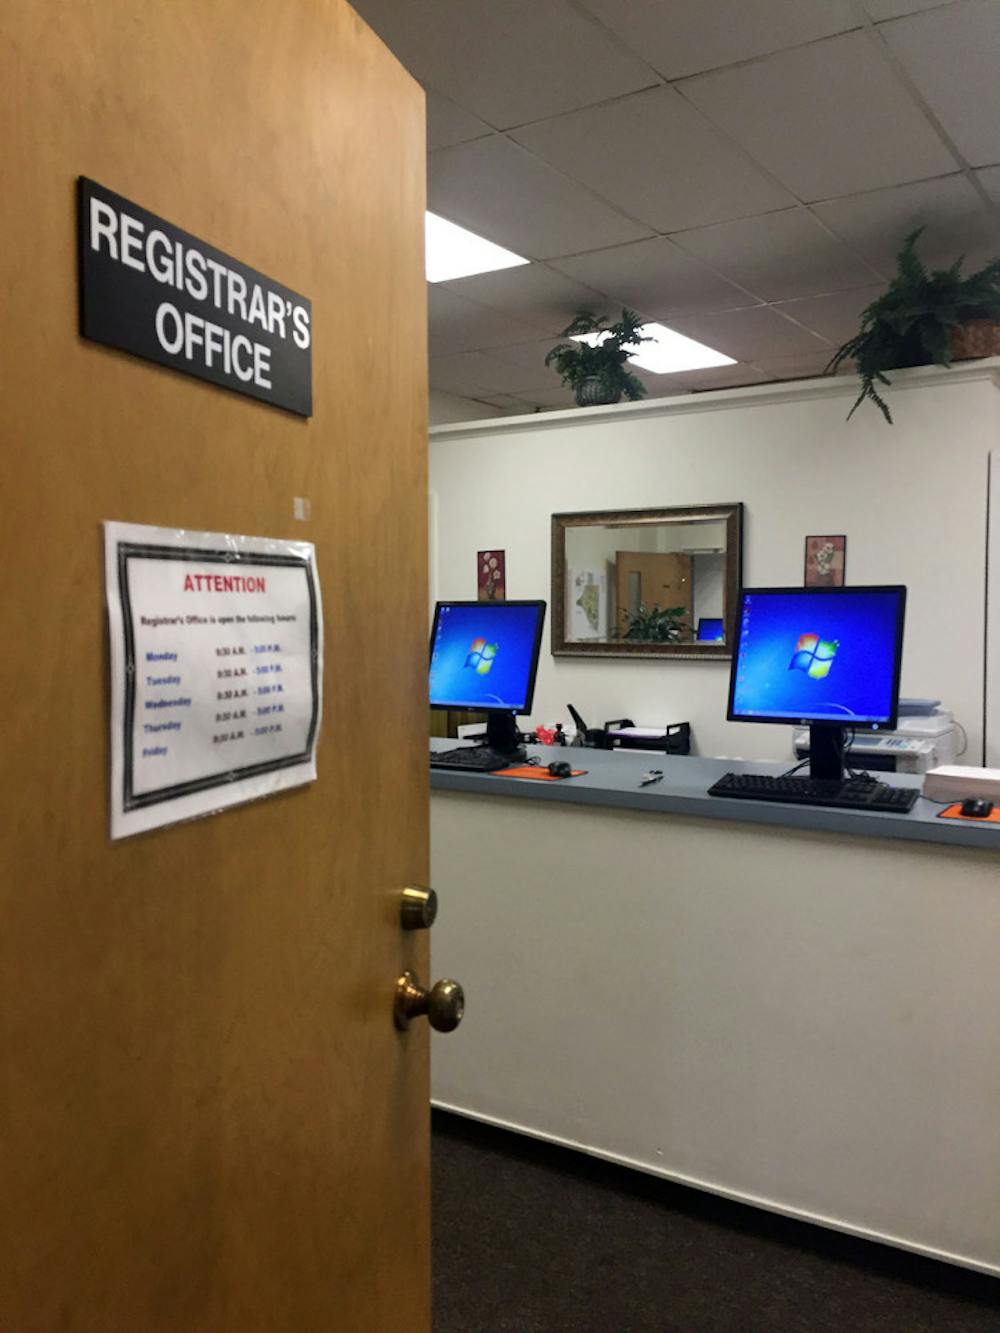 The Registrar's Office helps students who have questions about the registration process. If you have problems while registering for classes, they answer phone calls.